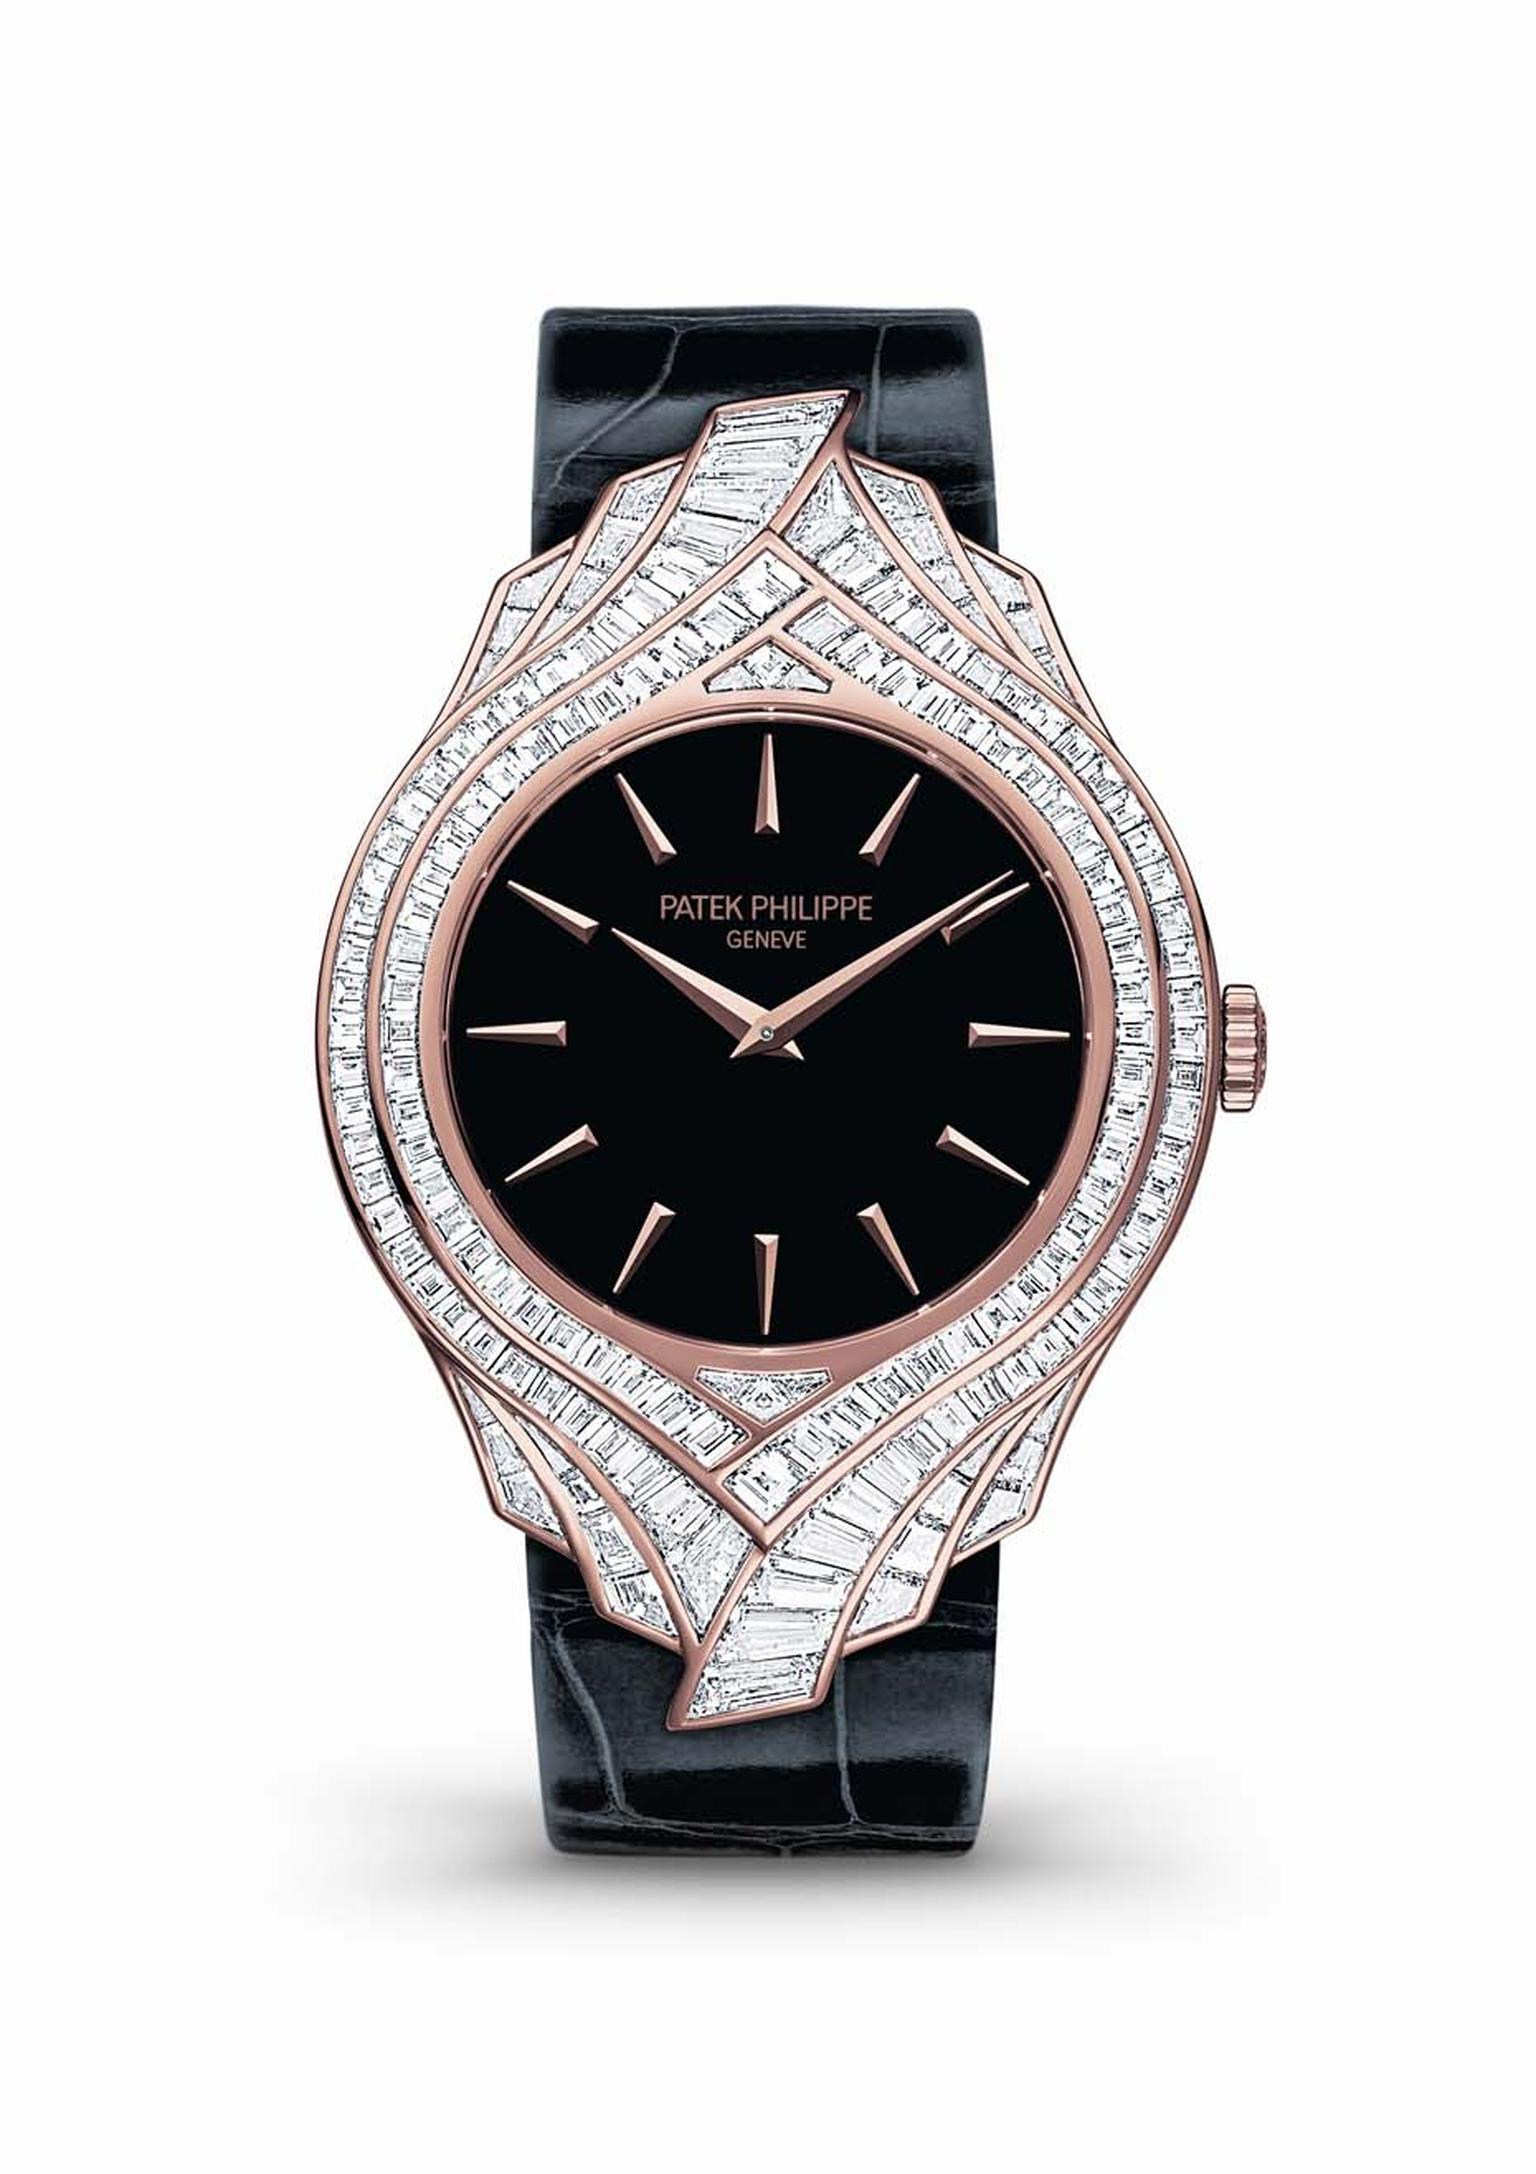 Patek Philippe's Calatrava Haute Joaillere Ref. 4895R watch in rose gold, with a black lacquered dial, rose gold hour markers, takes the contours of the 1932 Calatrava model and adorns them with a diamond collar